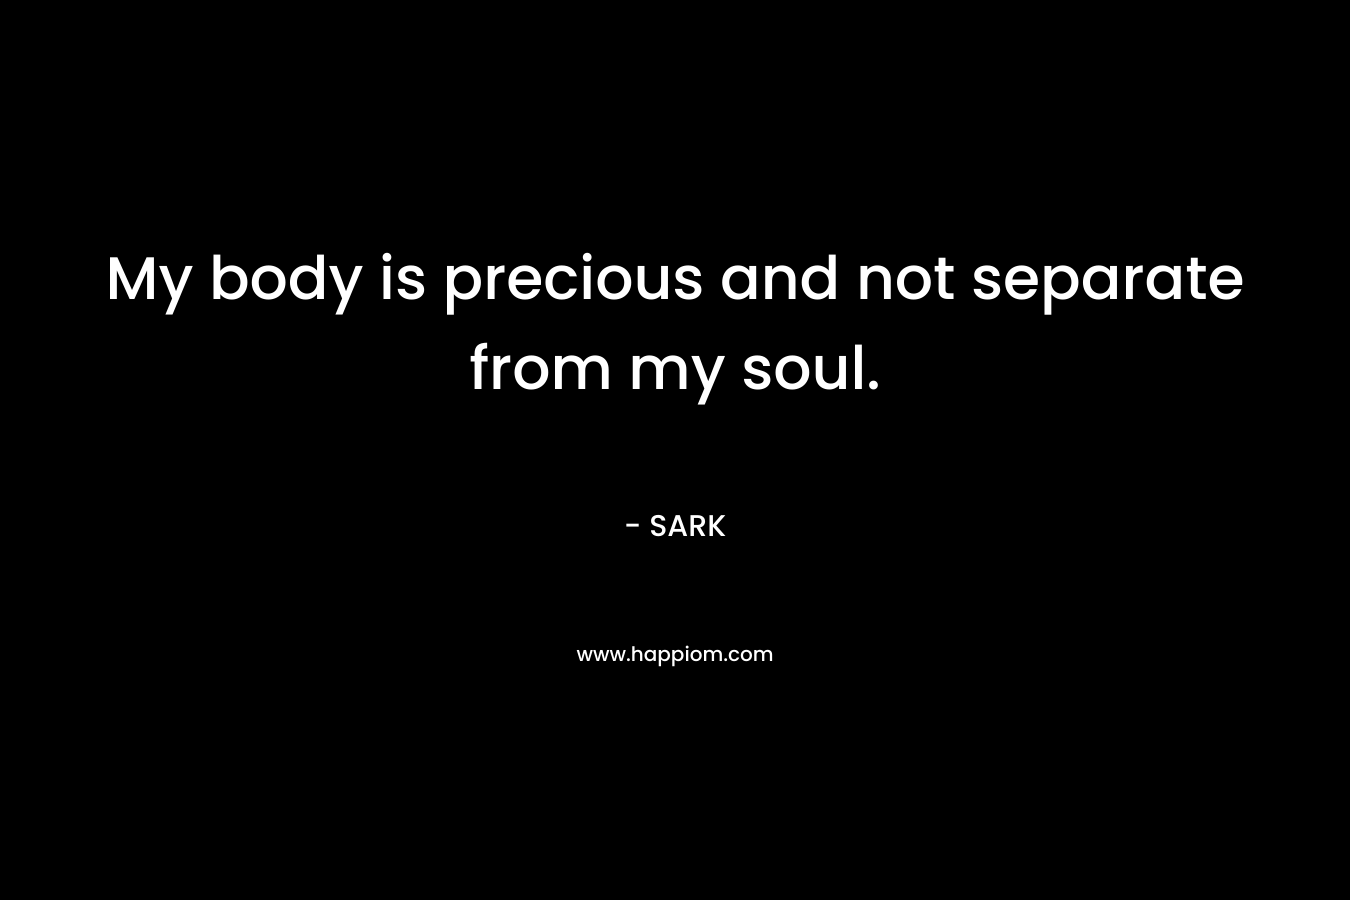 My body is precious and not separate from my soul.